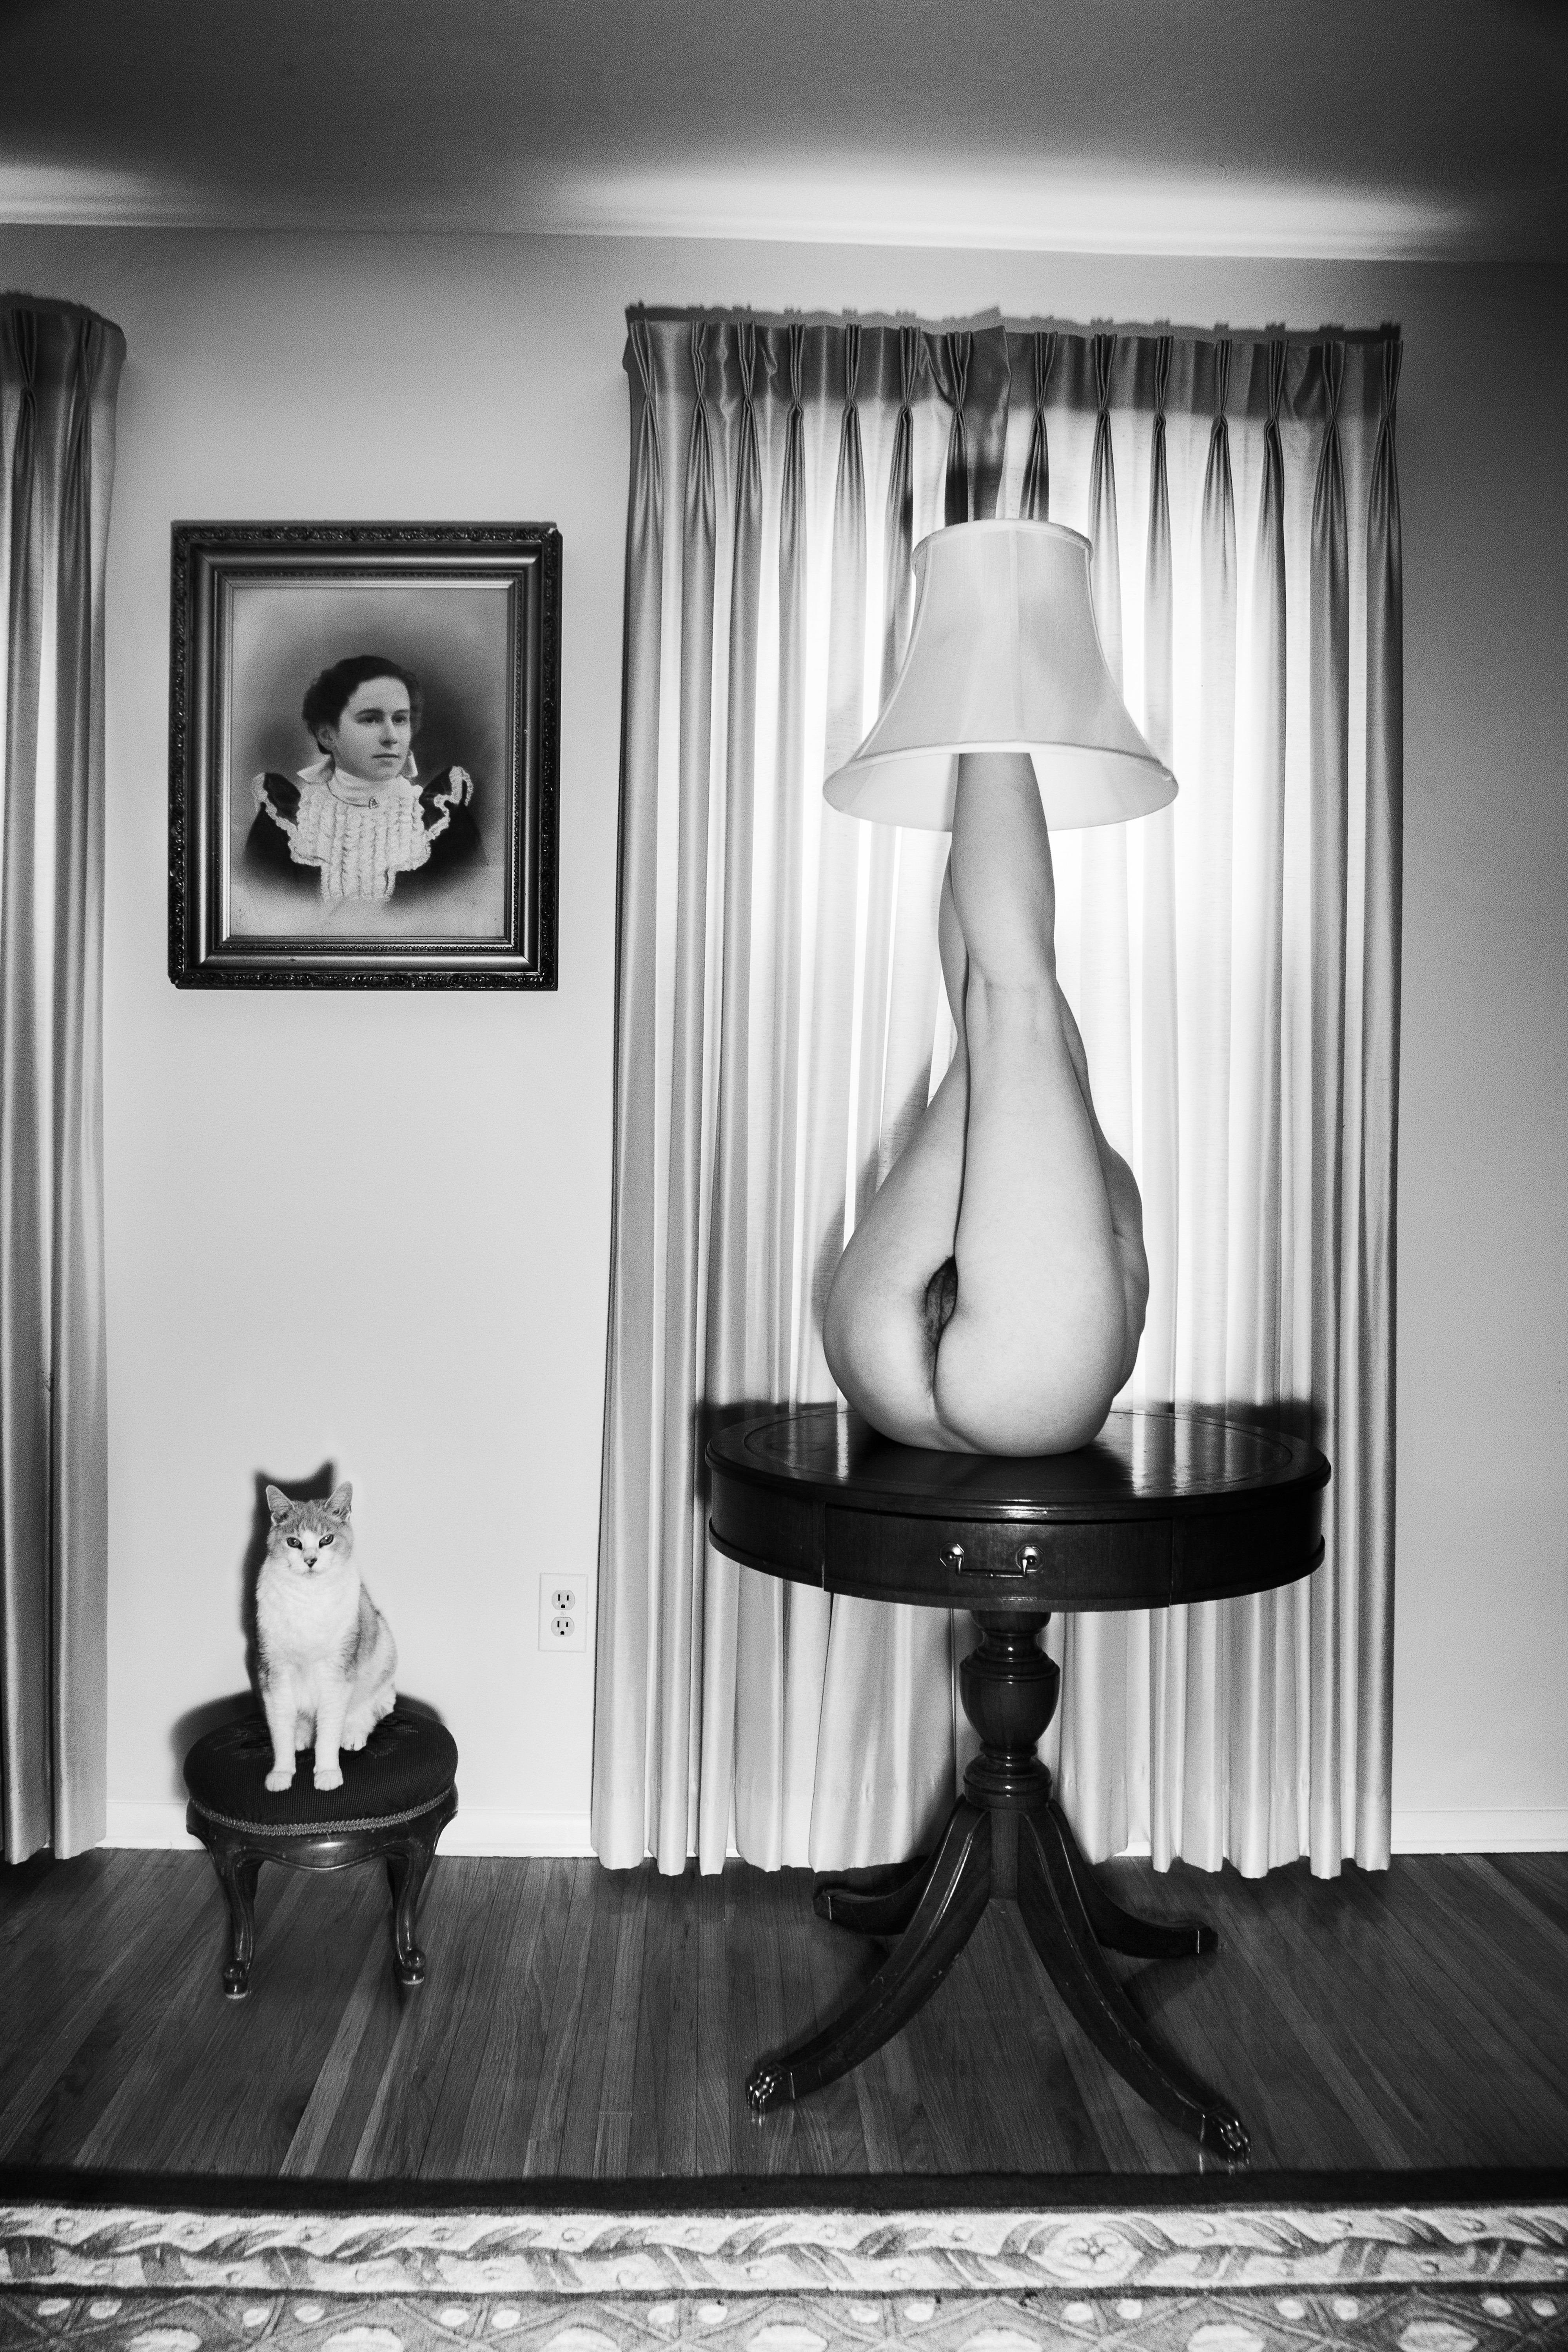 Loreal  Prystaj Black and White Photograph - Lampshade, picture frame, and my pussy-cat